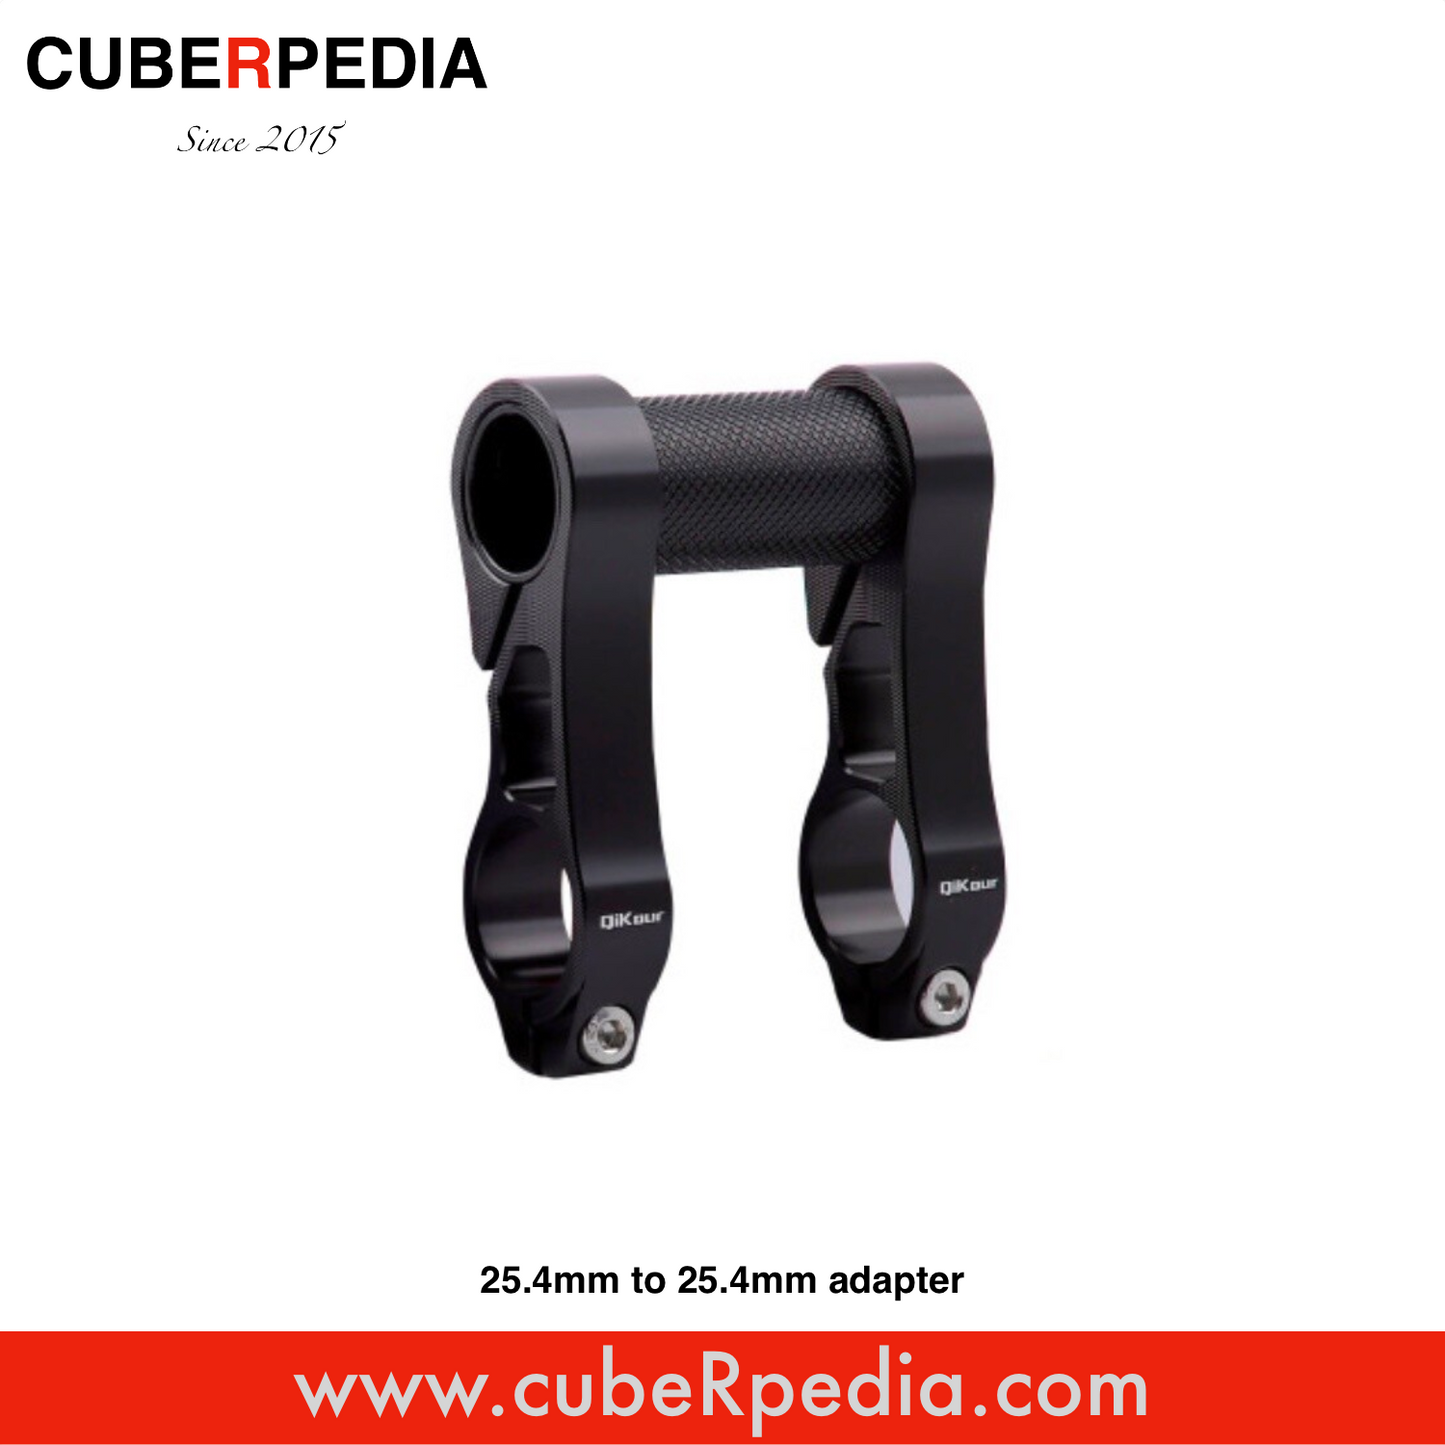 25.4mm to 25.4mm Stem Clamp CNC adapter - Black